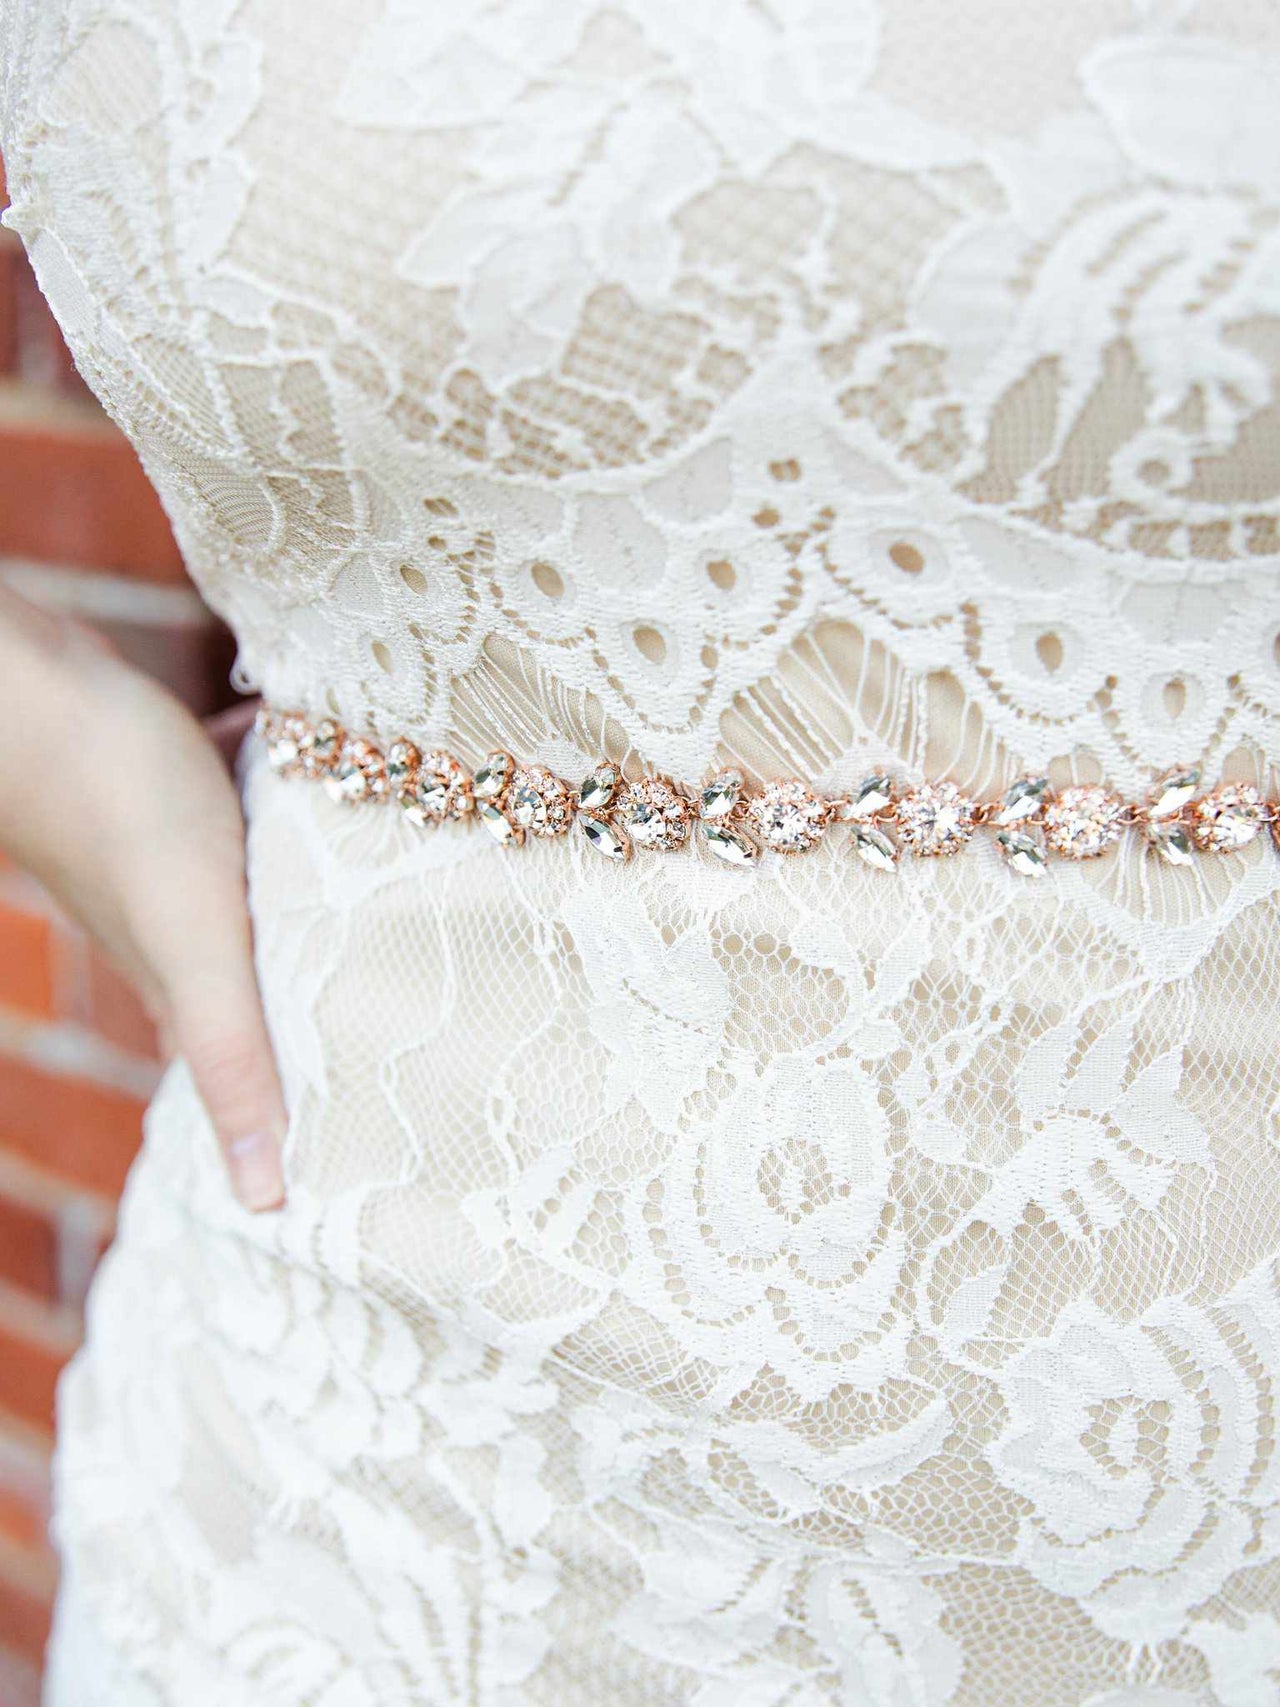 Glistening Rhinestone Flower Belt With Pure Sash - Rose Gold-Belts-Southern Fried Chics